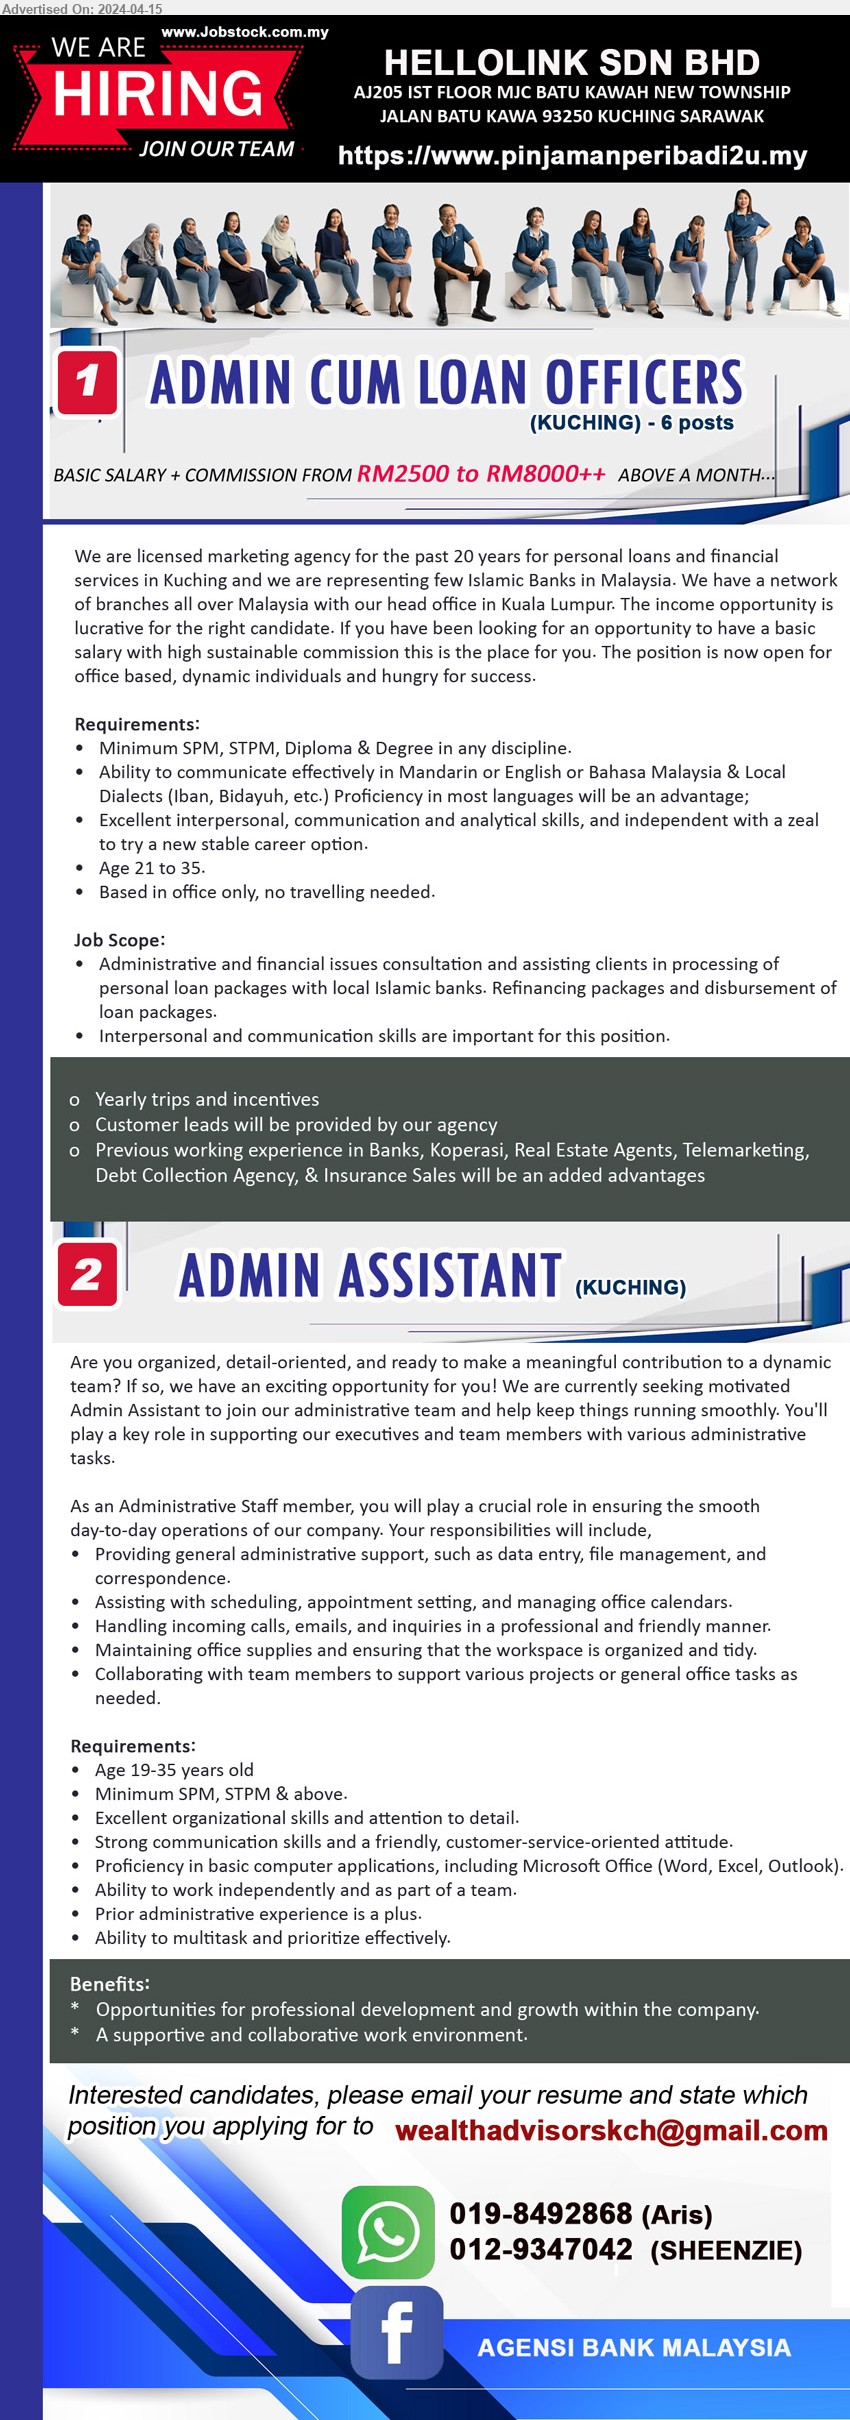 HELLOLINK SDN BHD - 1. ADMIN CUM LOAN OFFICERS (Kuching), BASIC SALARY + COMMISSION RM2500 to RM8000++  ABOVE, Age 21 to 35, SPM, STPM, Diploma & Degree, Based in office only, no travelling needed...
2. ADMIN ASSISTANT (Kuching), SPM, STPM & above, Excellent organizational skills and attention to detail, Proficiency in basic computer applications,..
Whatsapp : 019-8492868 (Aris) / 012-9347042  (SHEENZIE) / Email resume to ...
